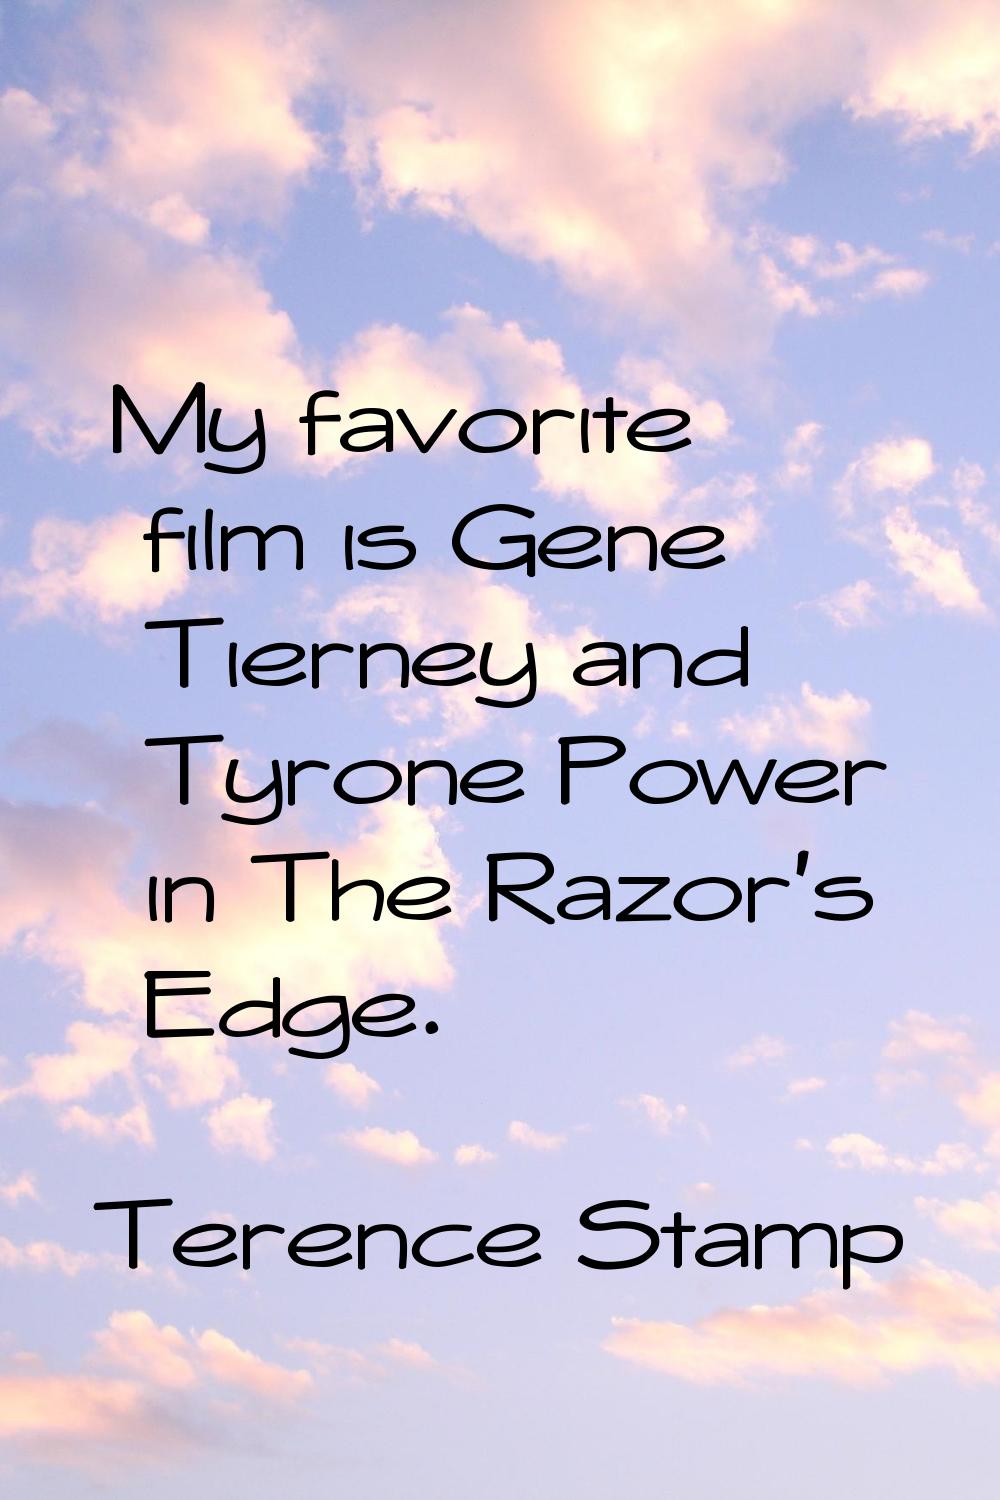 My favorite film is Gene Tierney and Tyrone Power in The Razor's Edge.